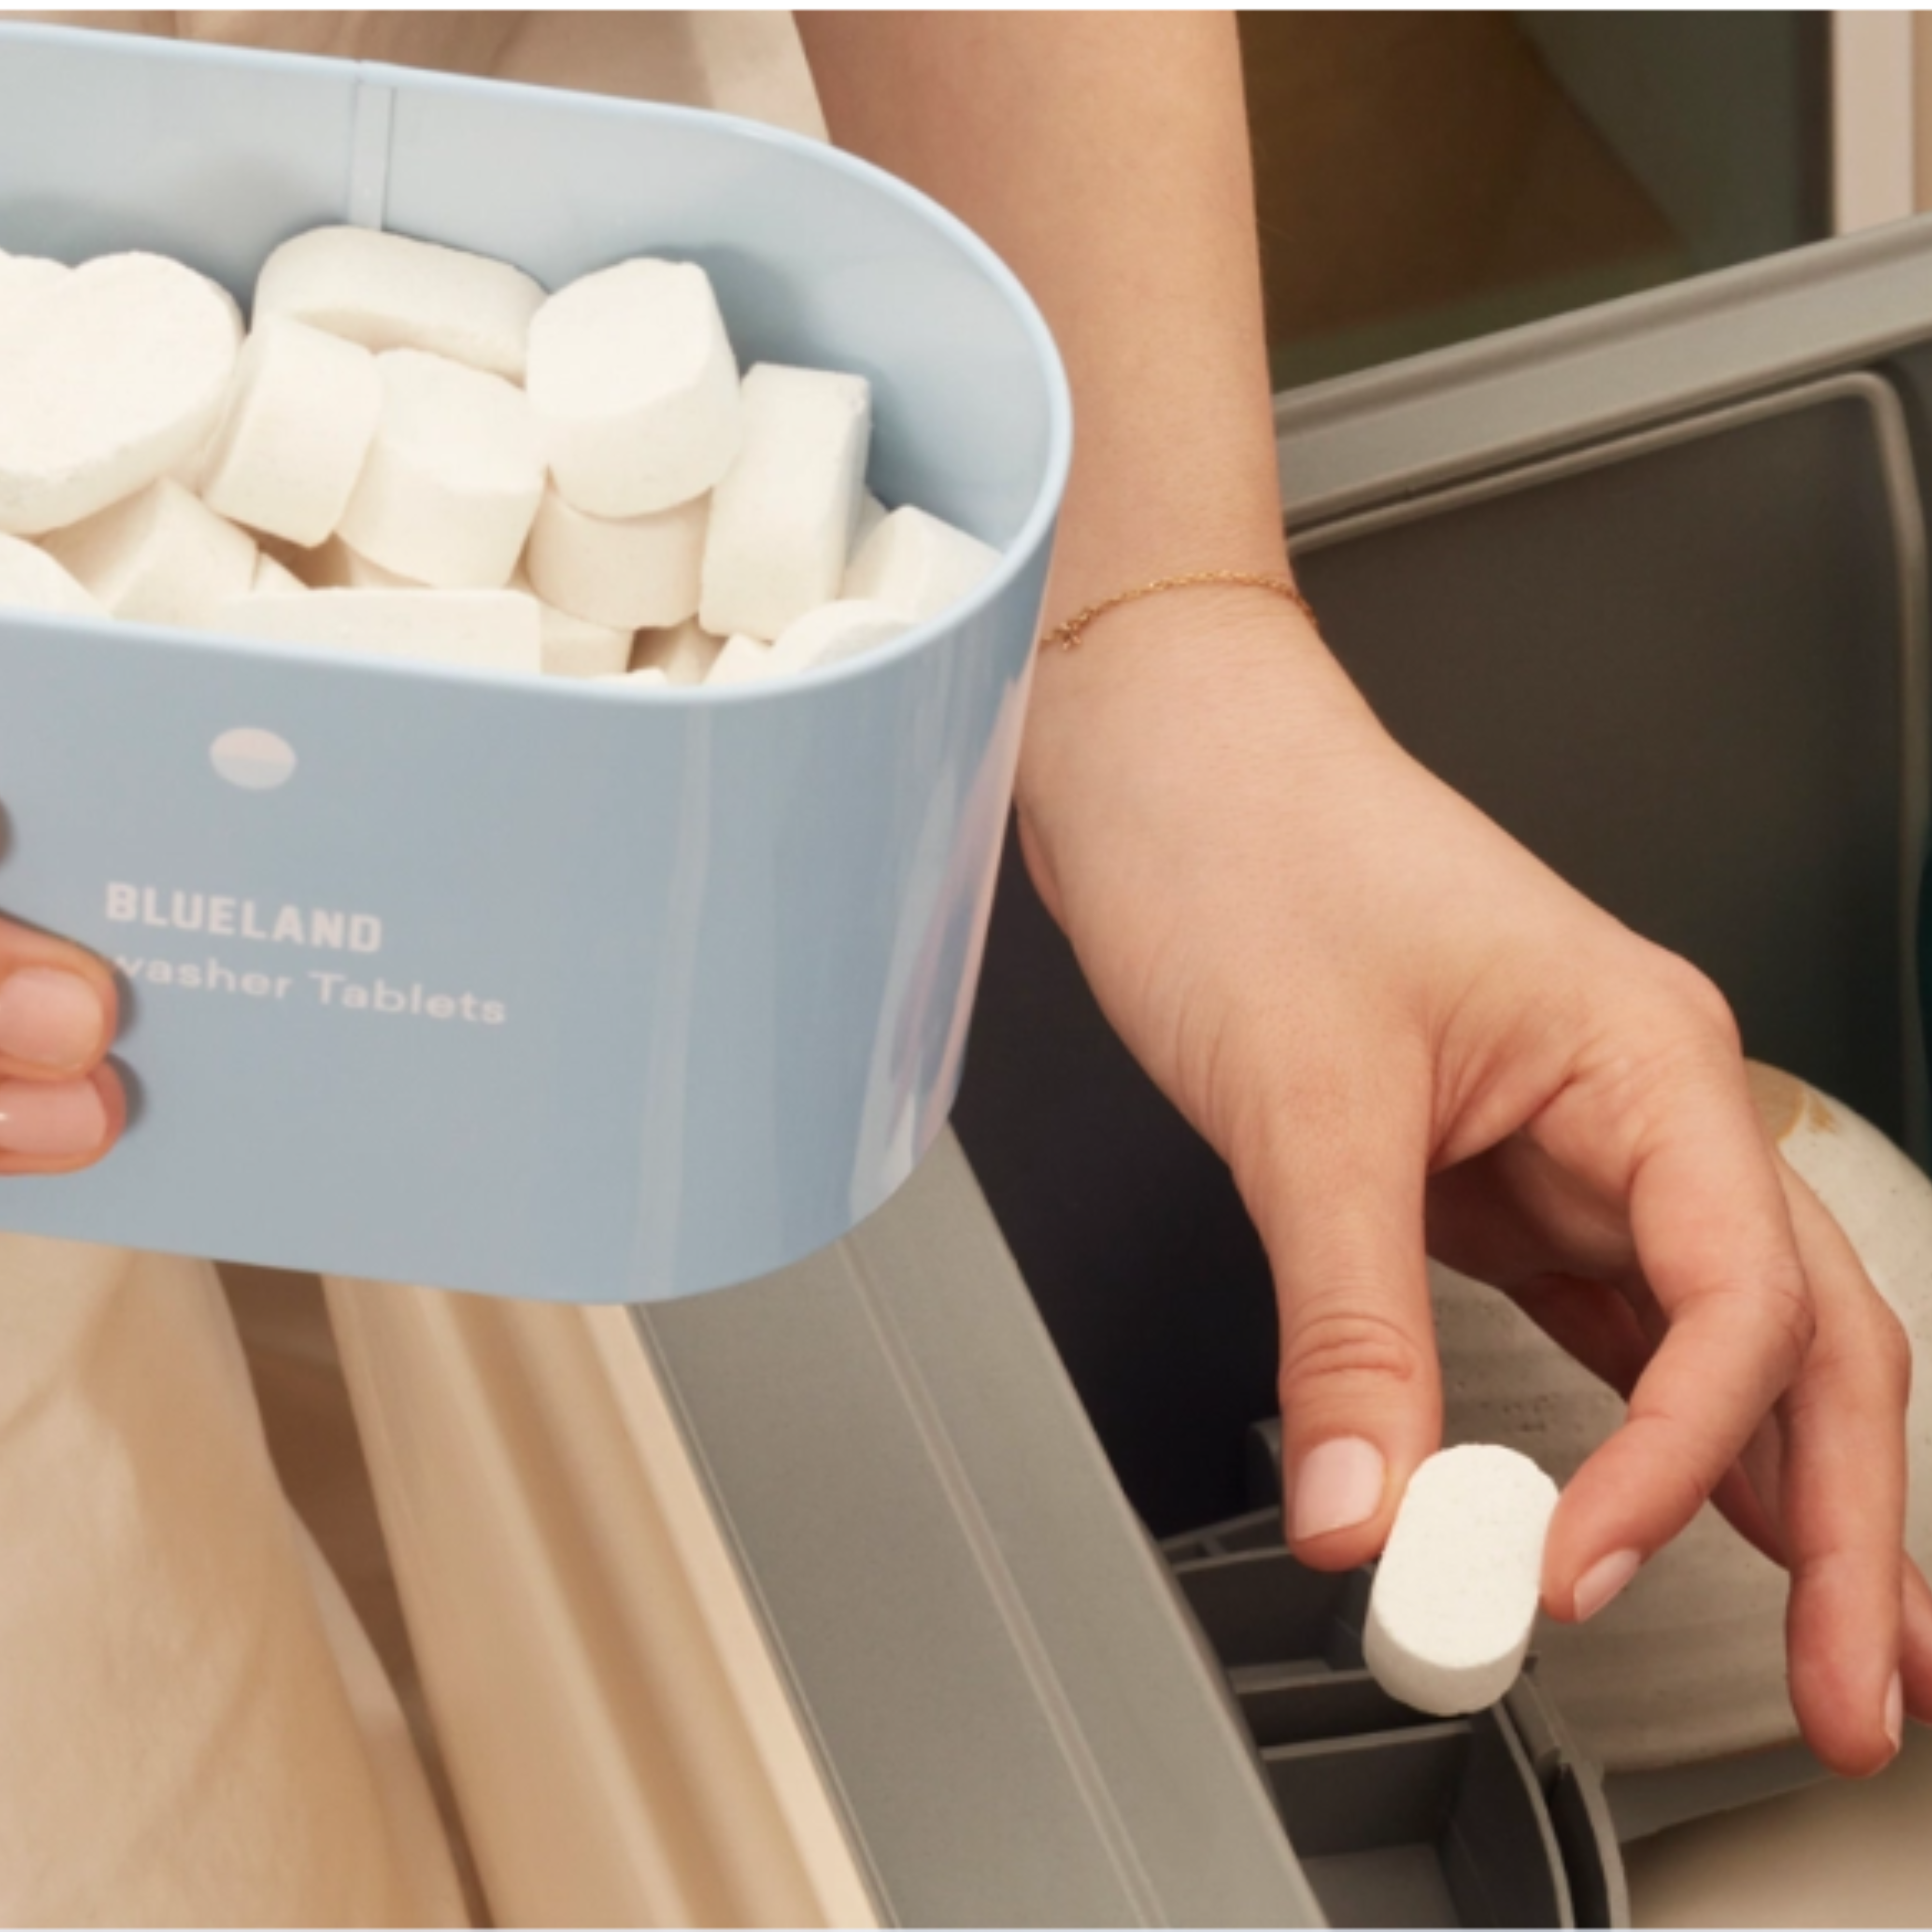 Blueland: 8 Of The Best Zero Waste Dishwasher Detergent Options You Need to Try Now